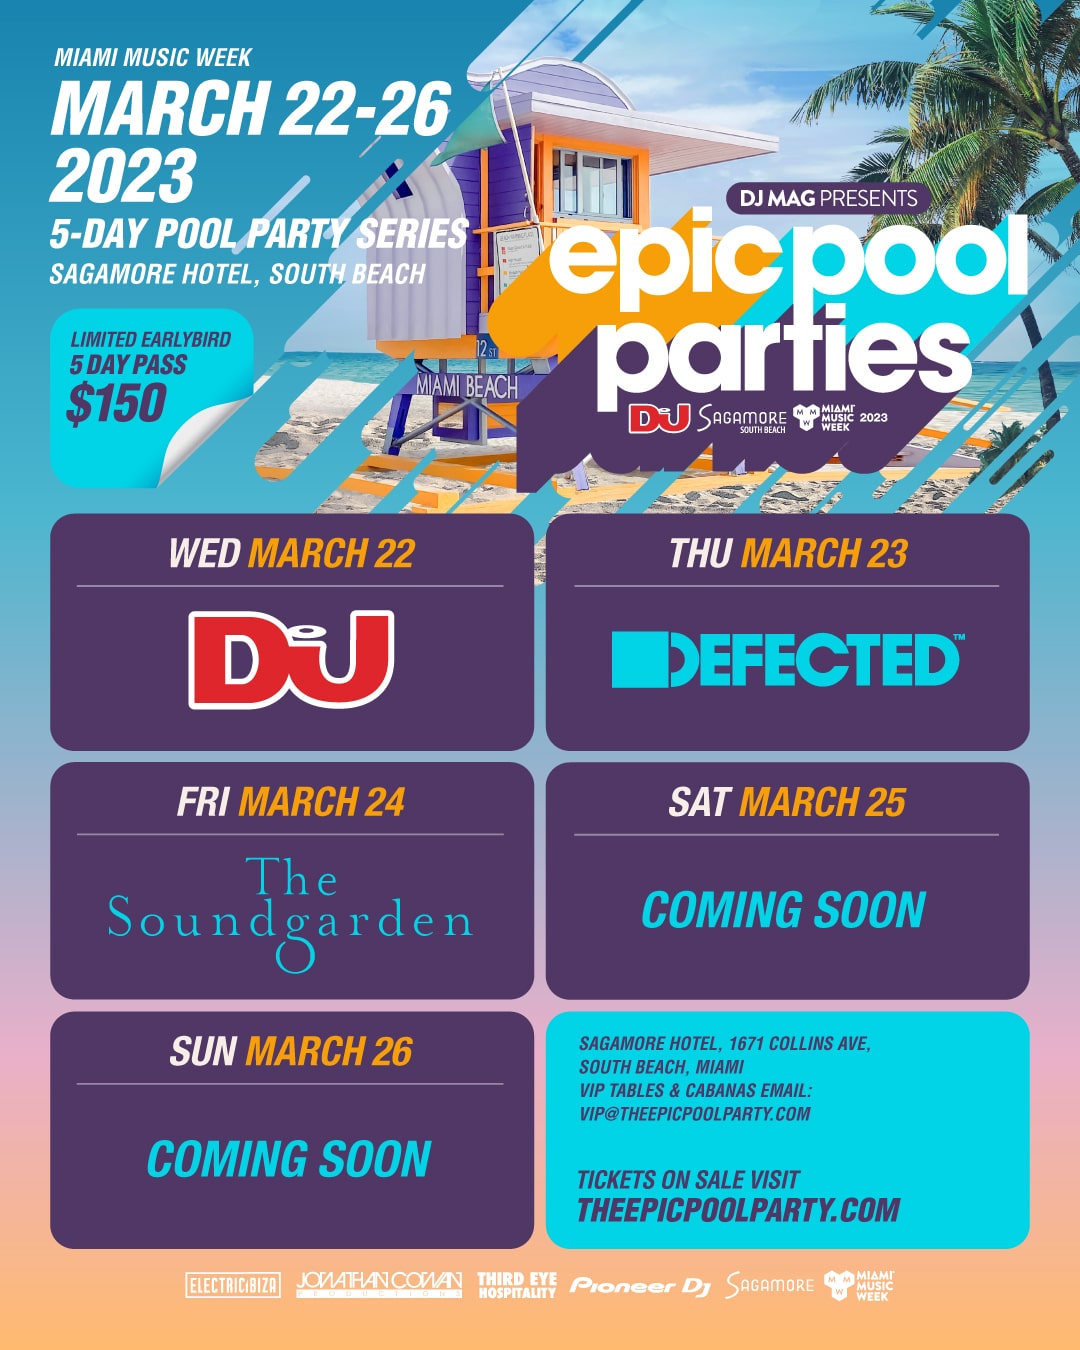 Epic Pool Parties Announces String of Events for Miami Music Week 2023